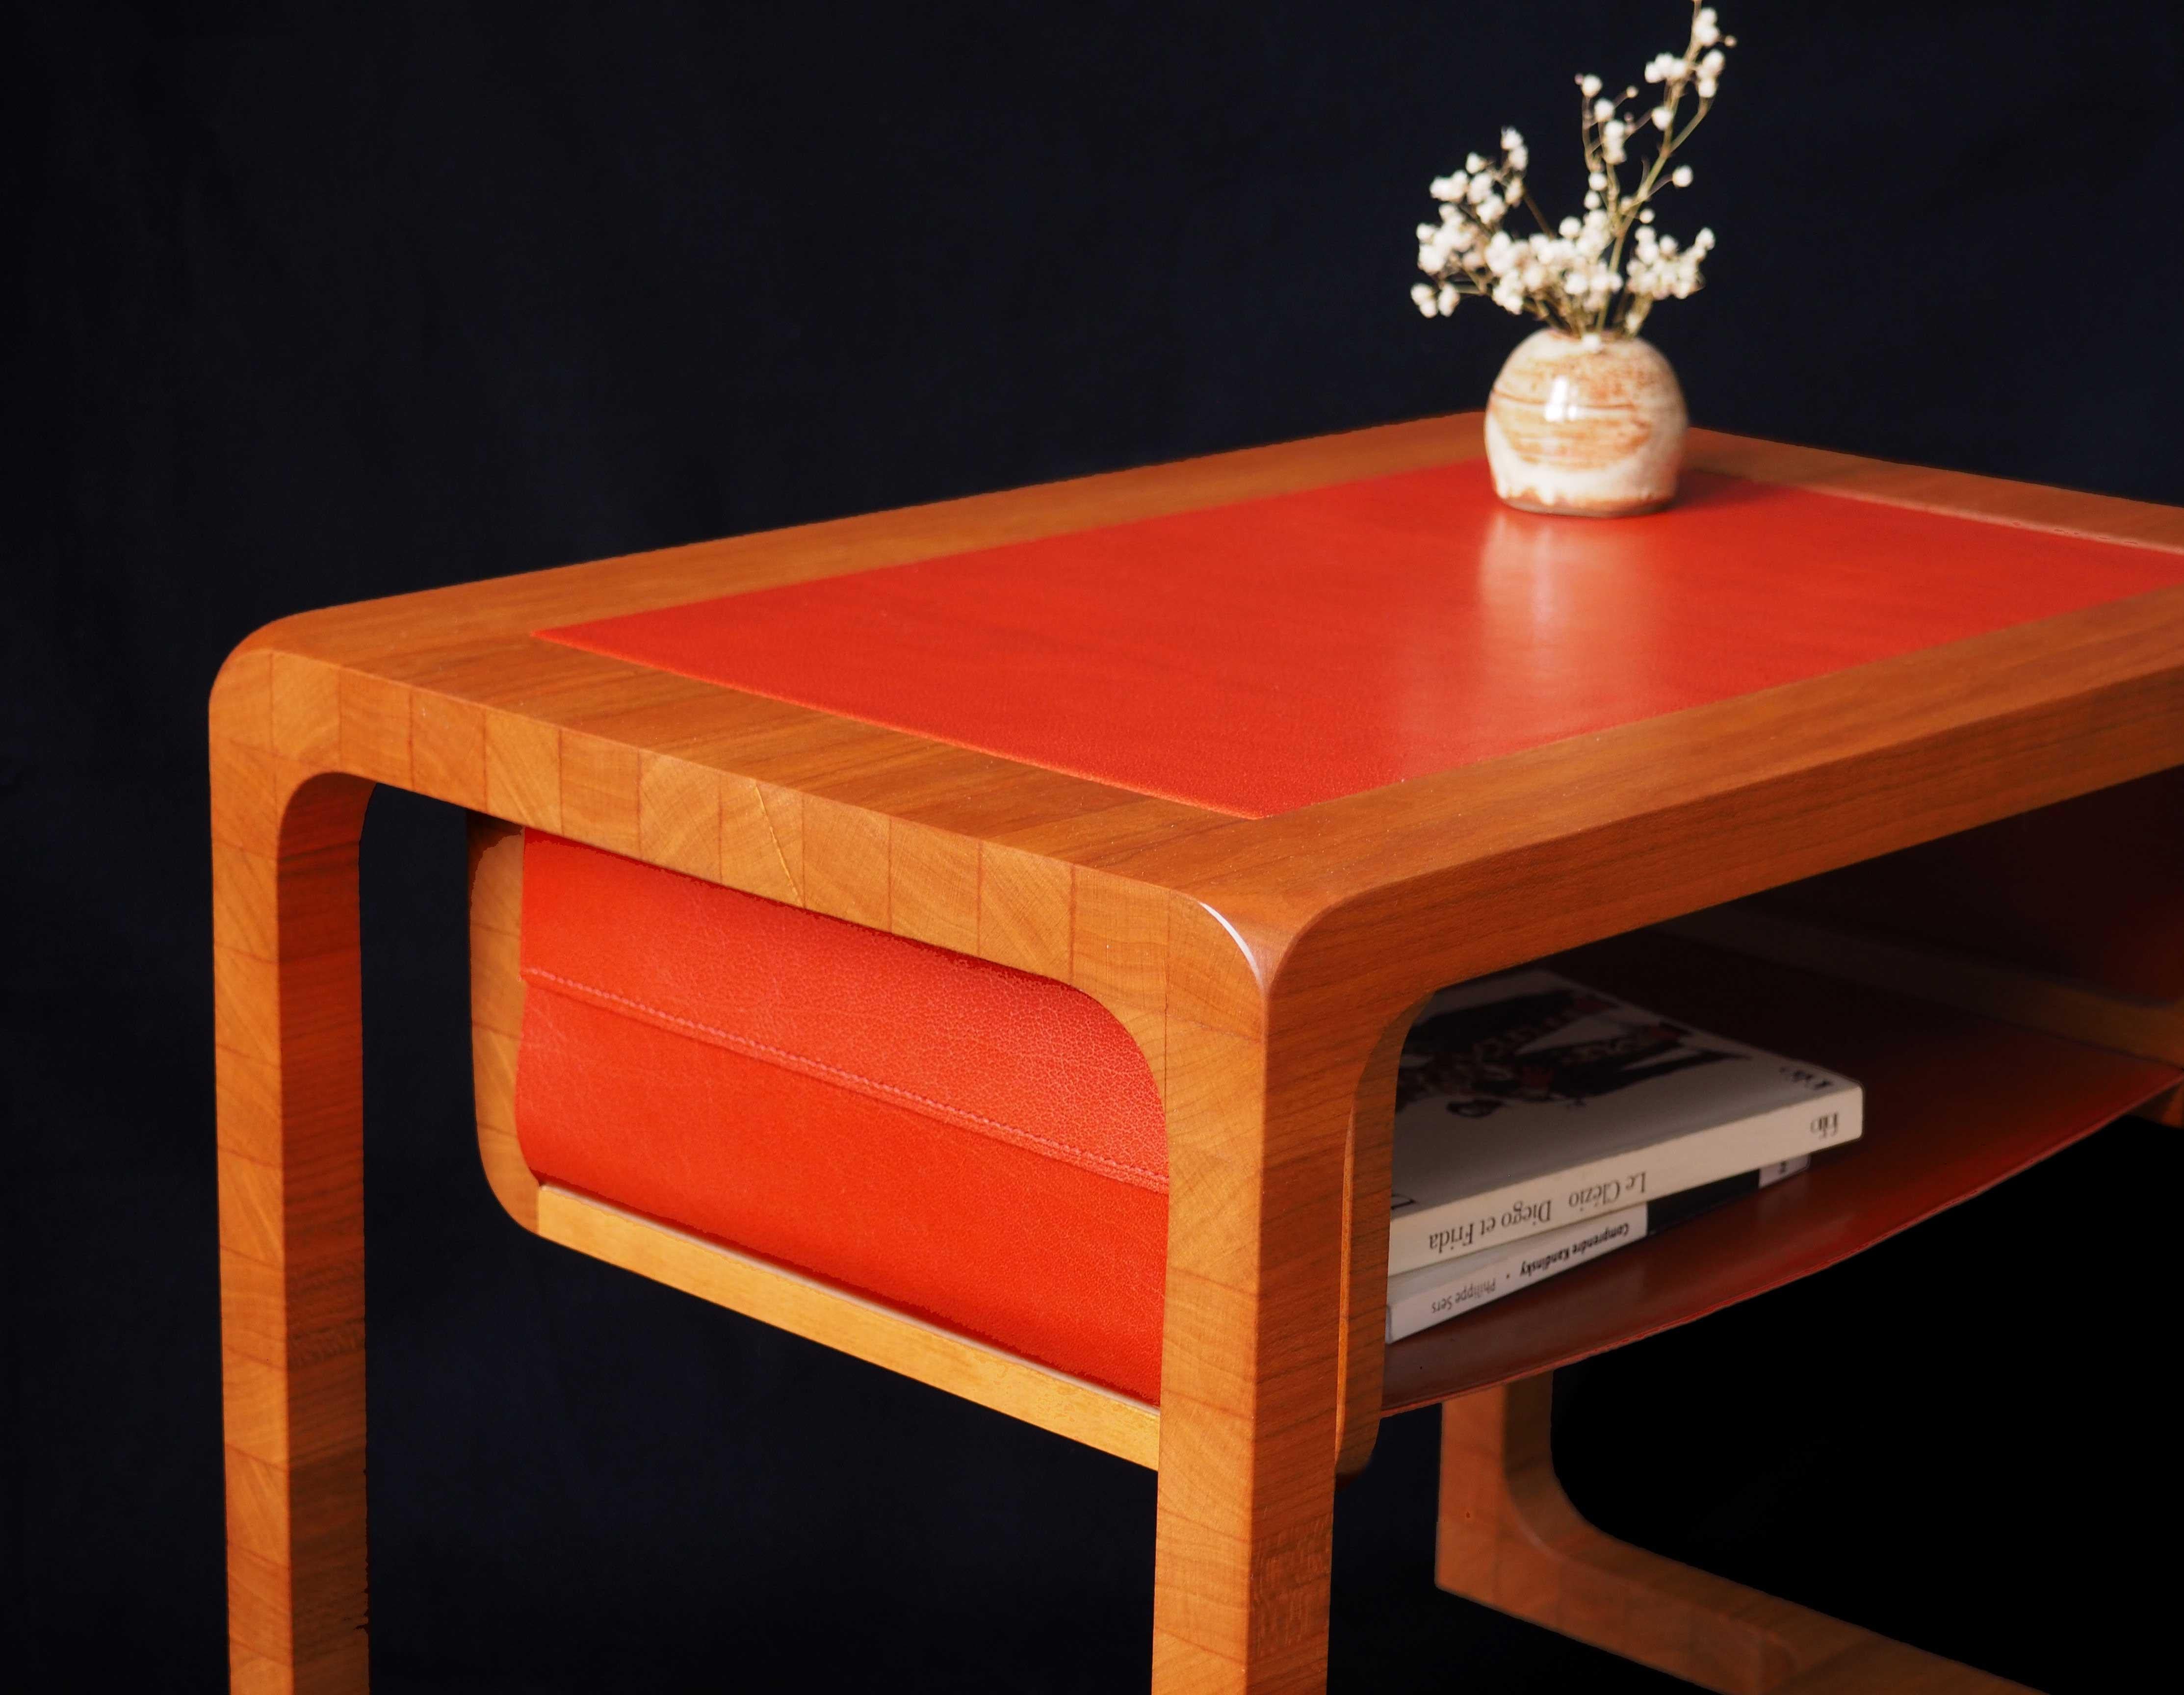 Side table made of massive cherry wood and orange vegetable-tanned leather.

This elegant piece of furniture made with end wood grain on his sides gives it an unique style. With its hanging storage compartment to accommodate books and magazines,